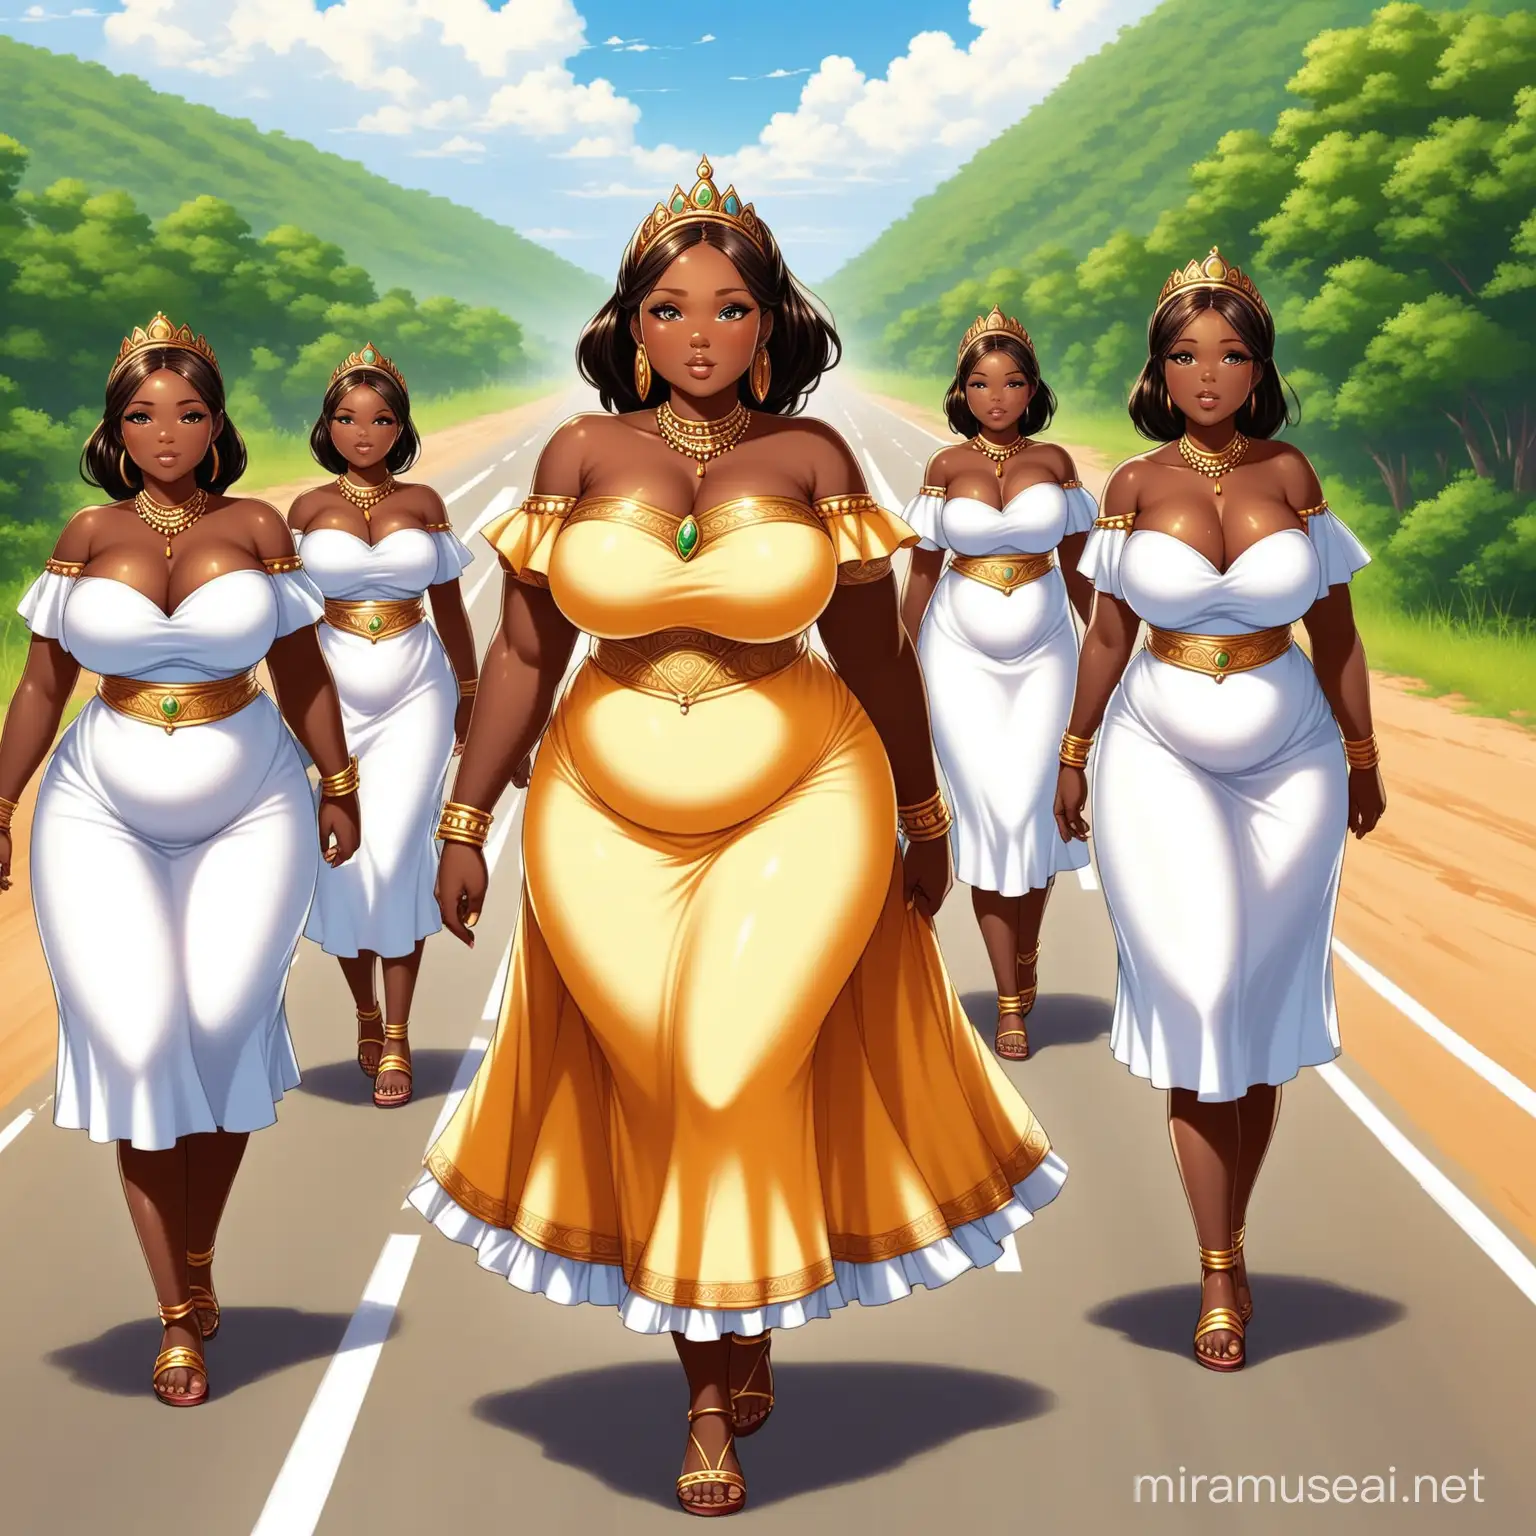 African Princess and Adoring Maids Strolling on a Picturesque Path